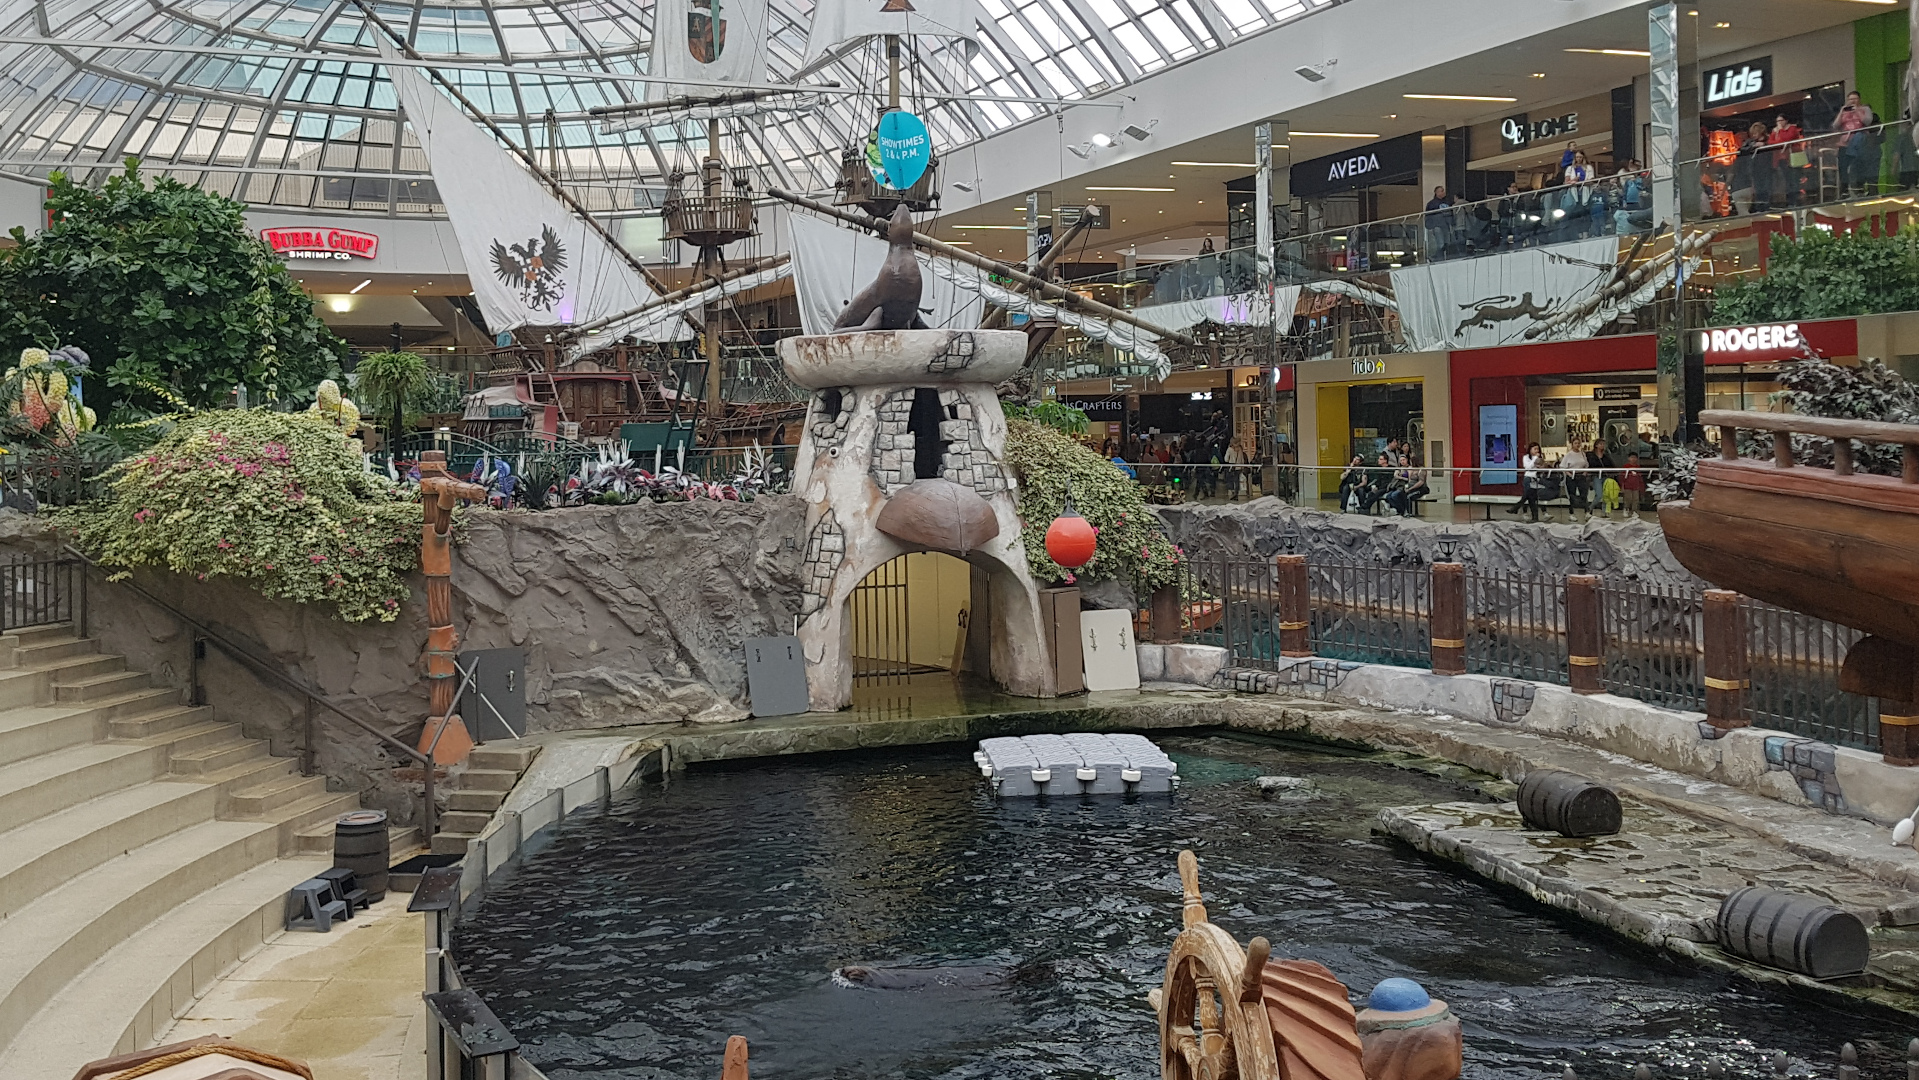 West Edmonton Mall had even a pirate park.